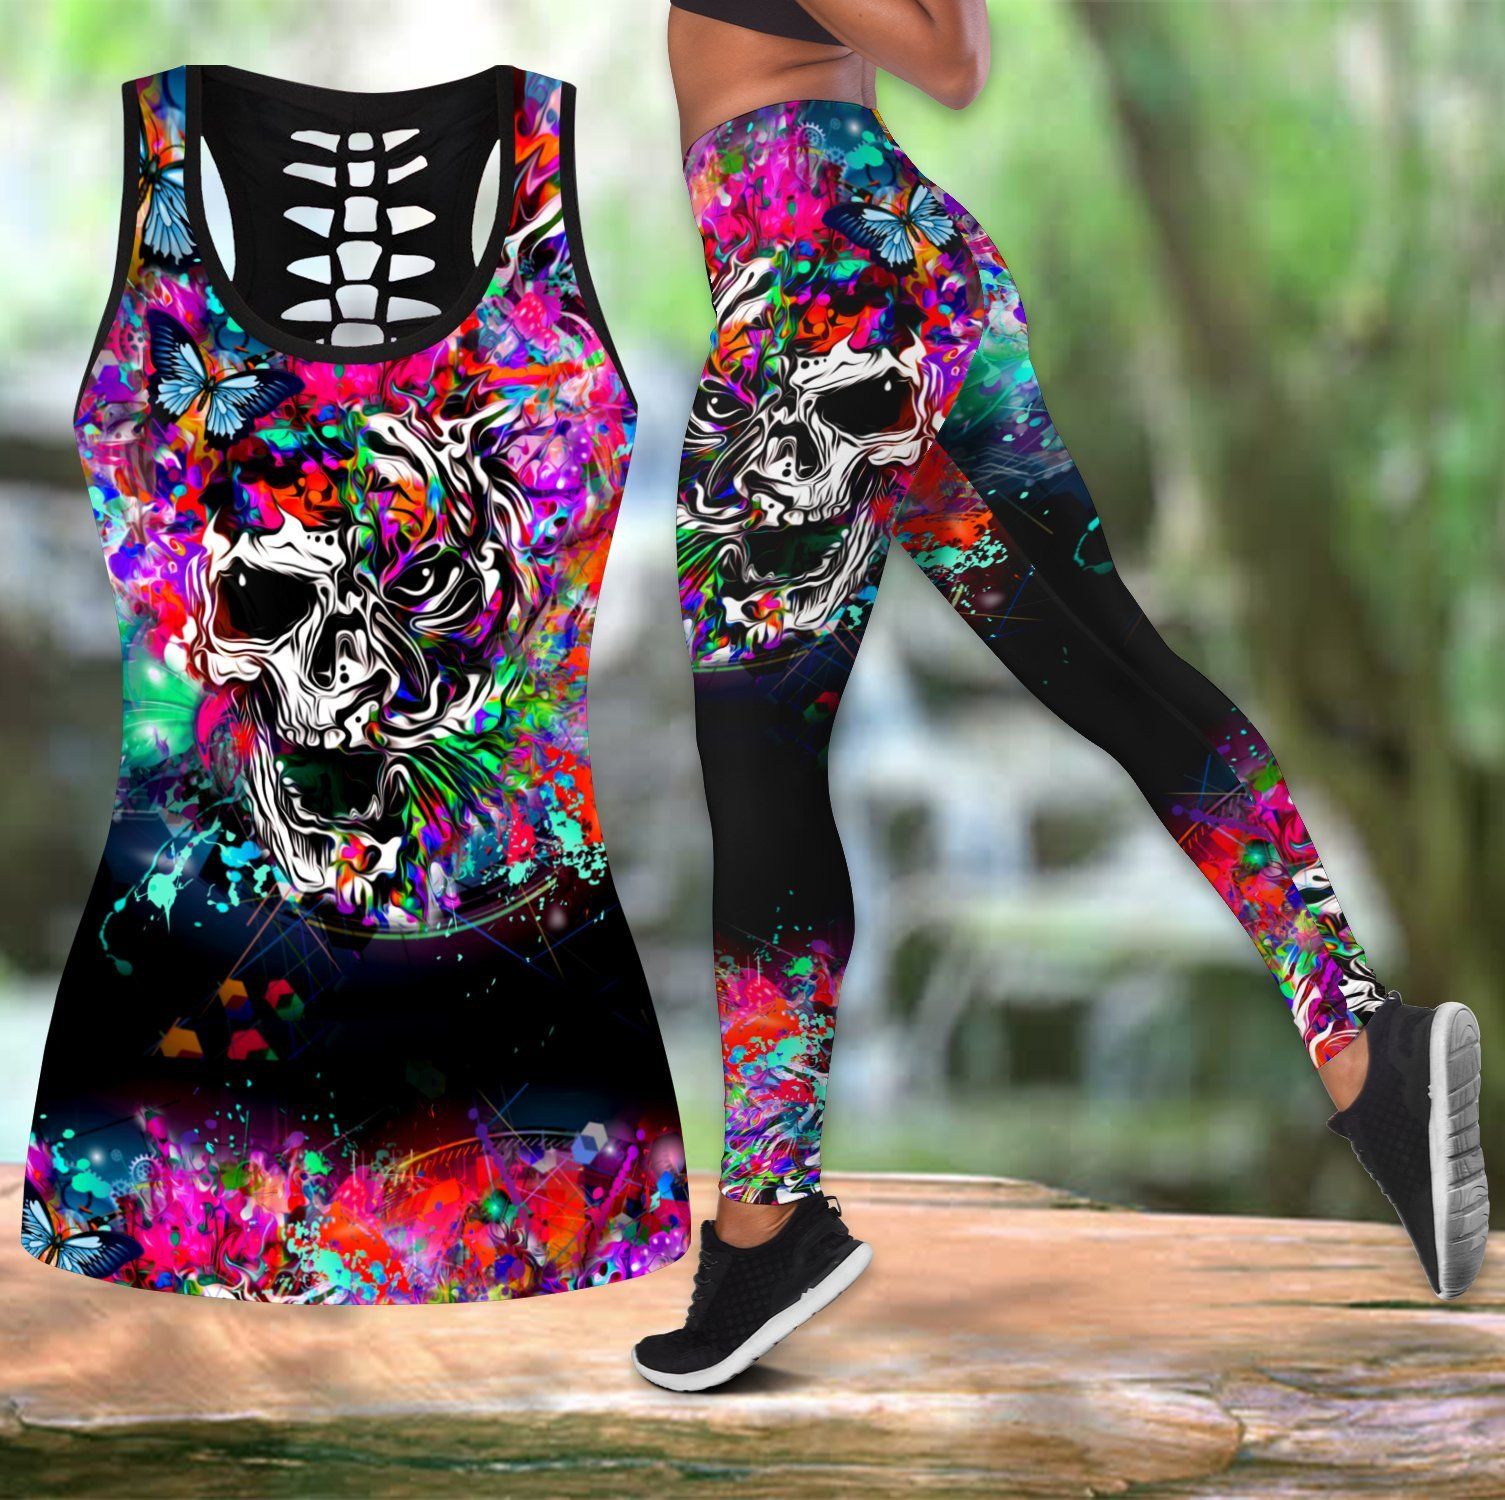 Love Animal Skull full color and Tattoos tanktop & legging outfit for women QB06092002